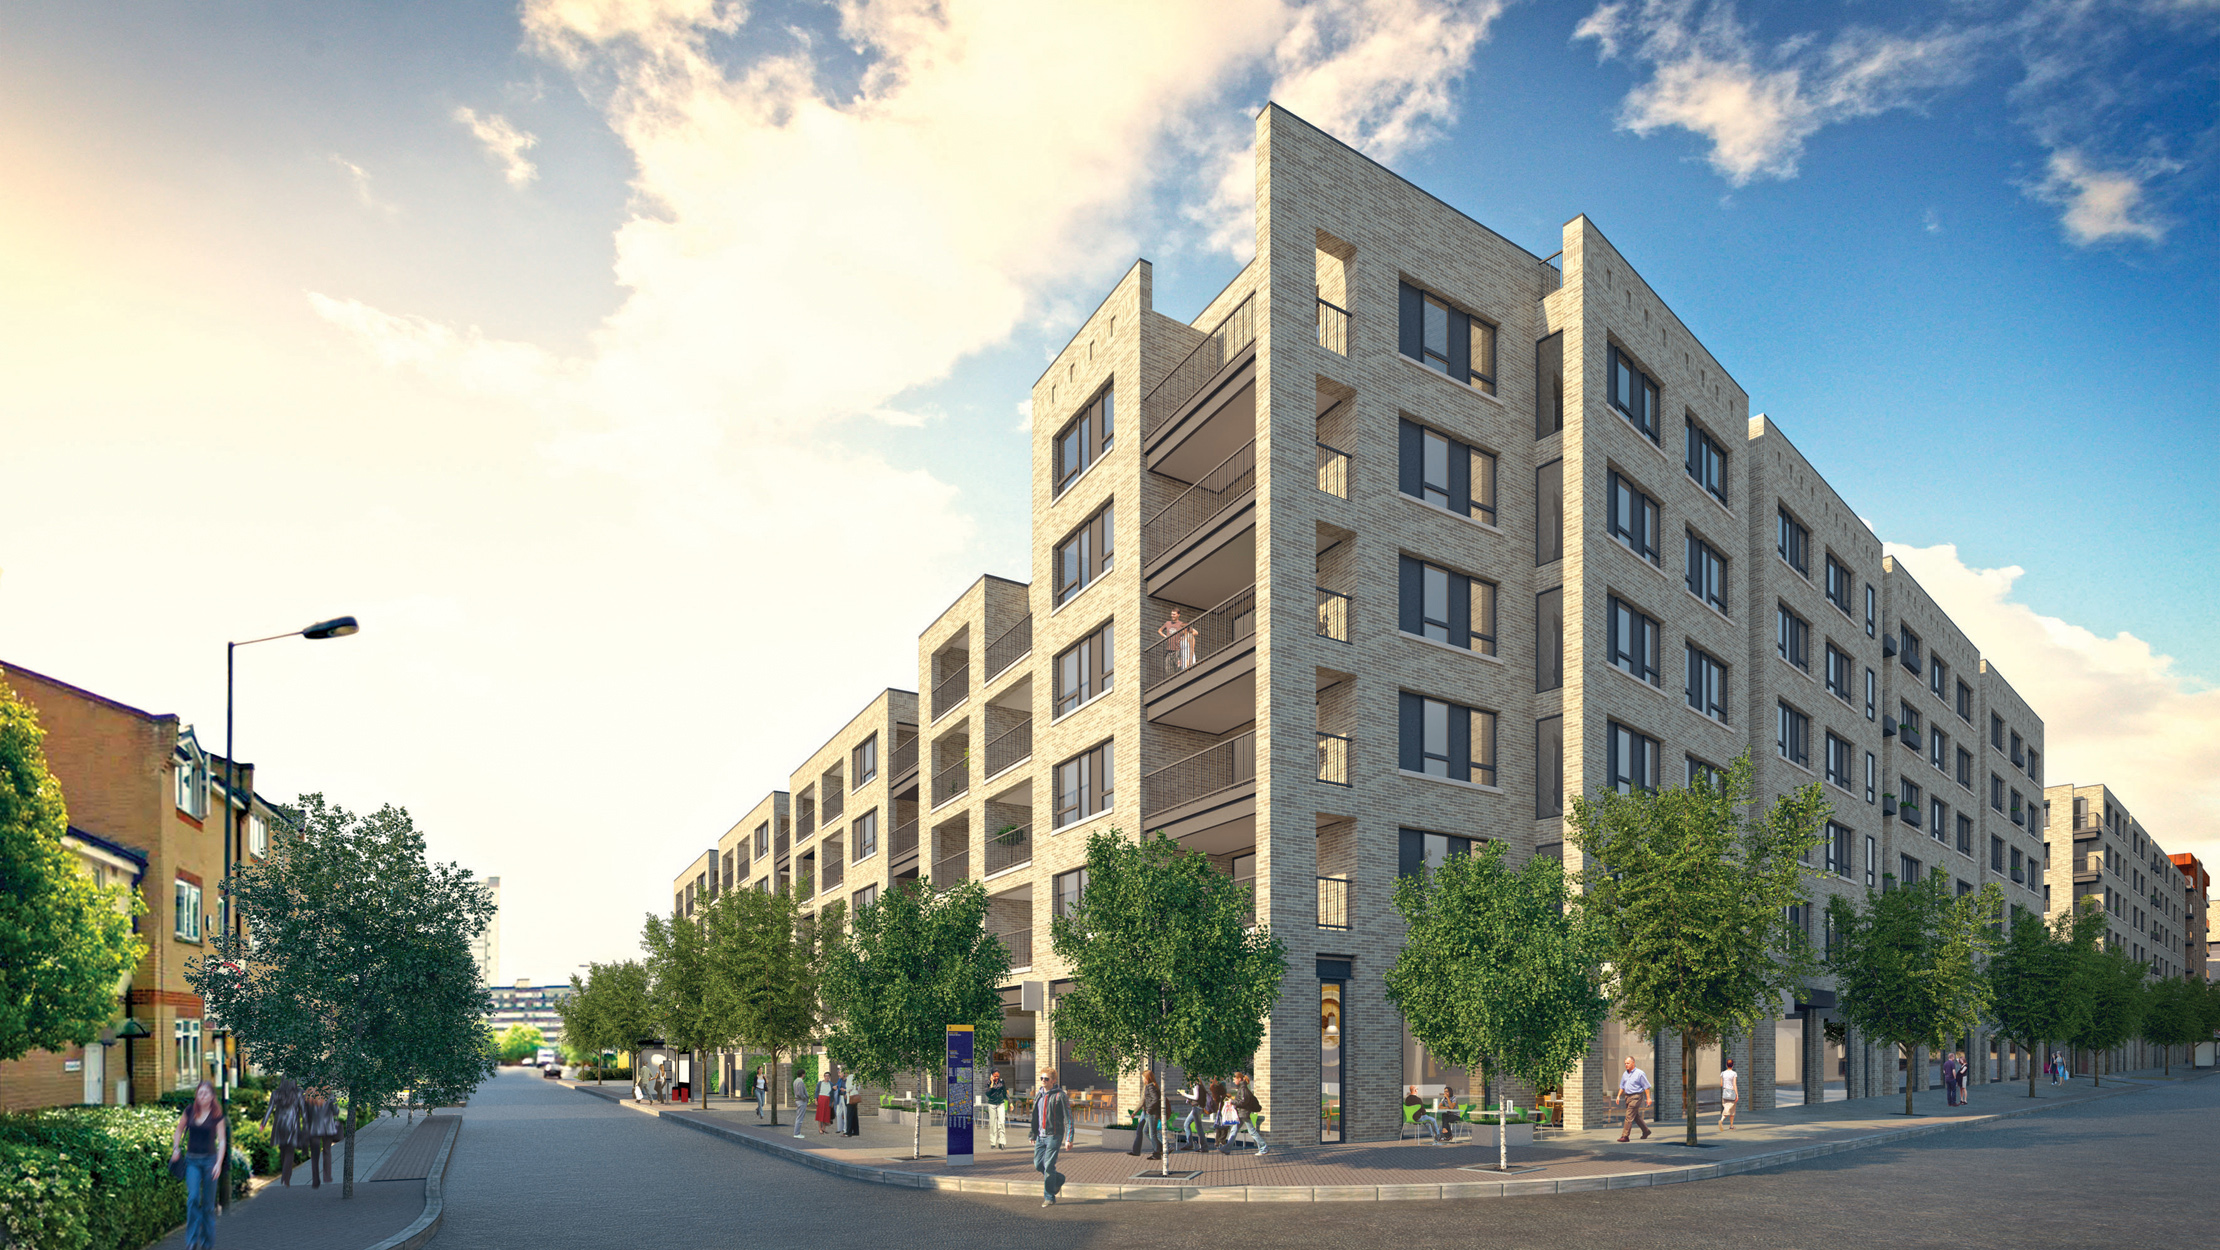 Introducing Marine Wharf East in Surrey Quays